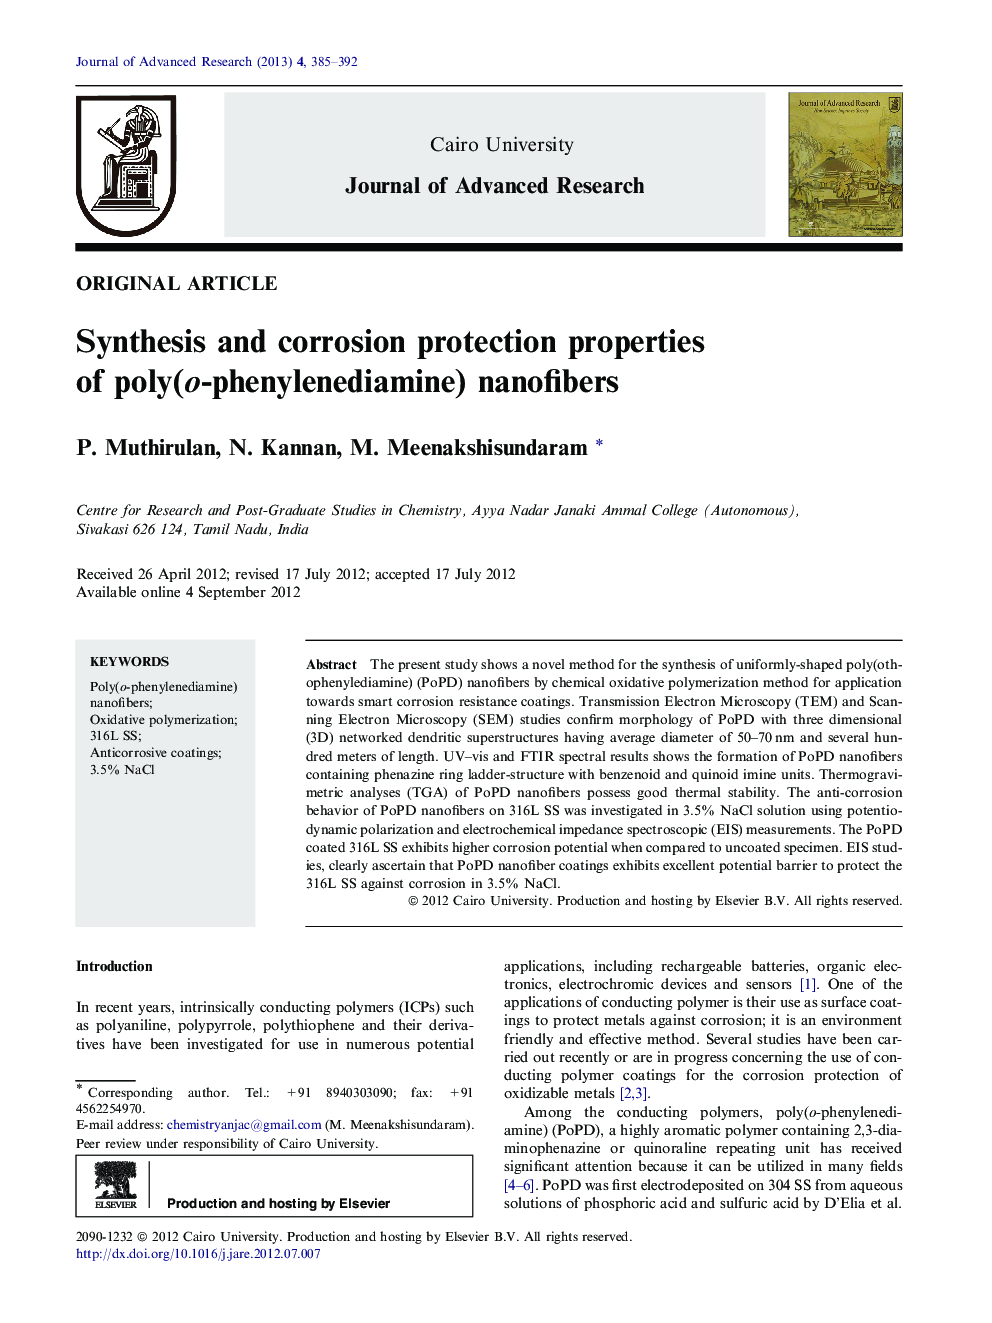 Synthesis and corrosion protection properties of poly(o-phenylenediamine) nanofibers 